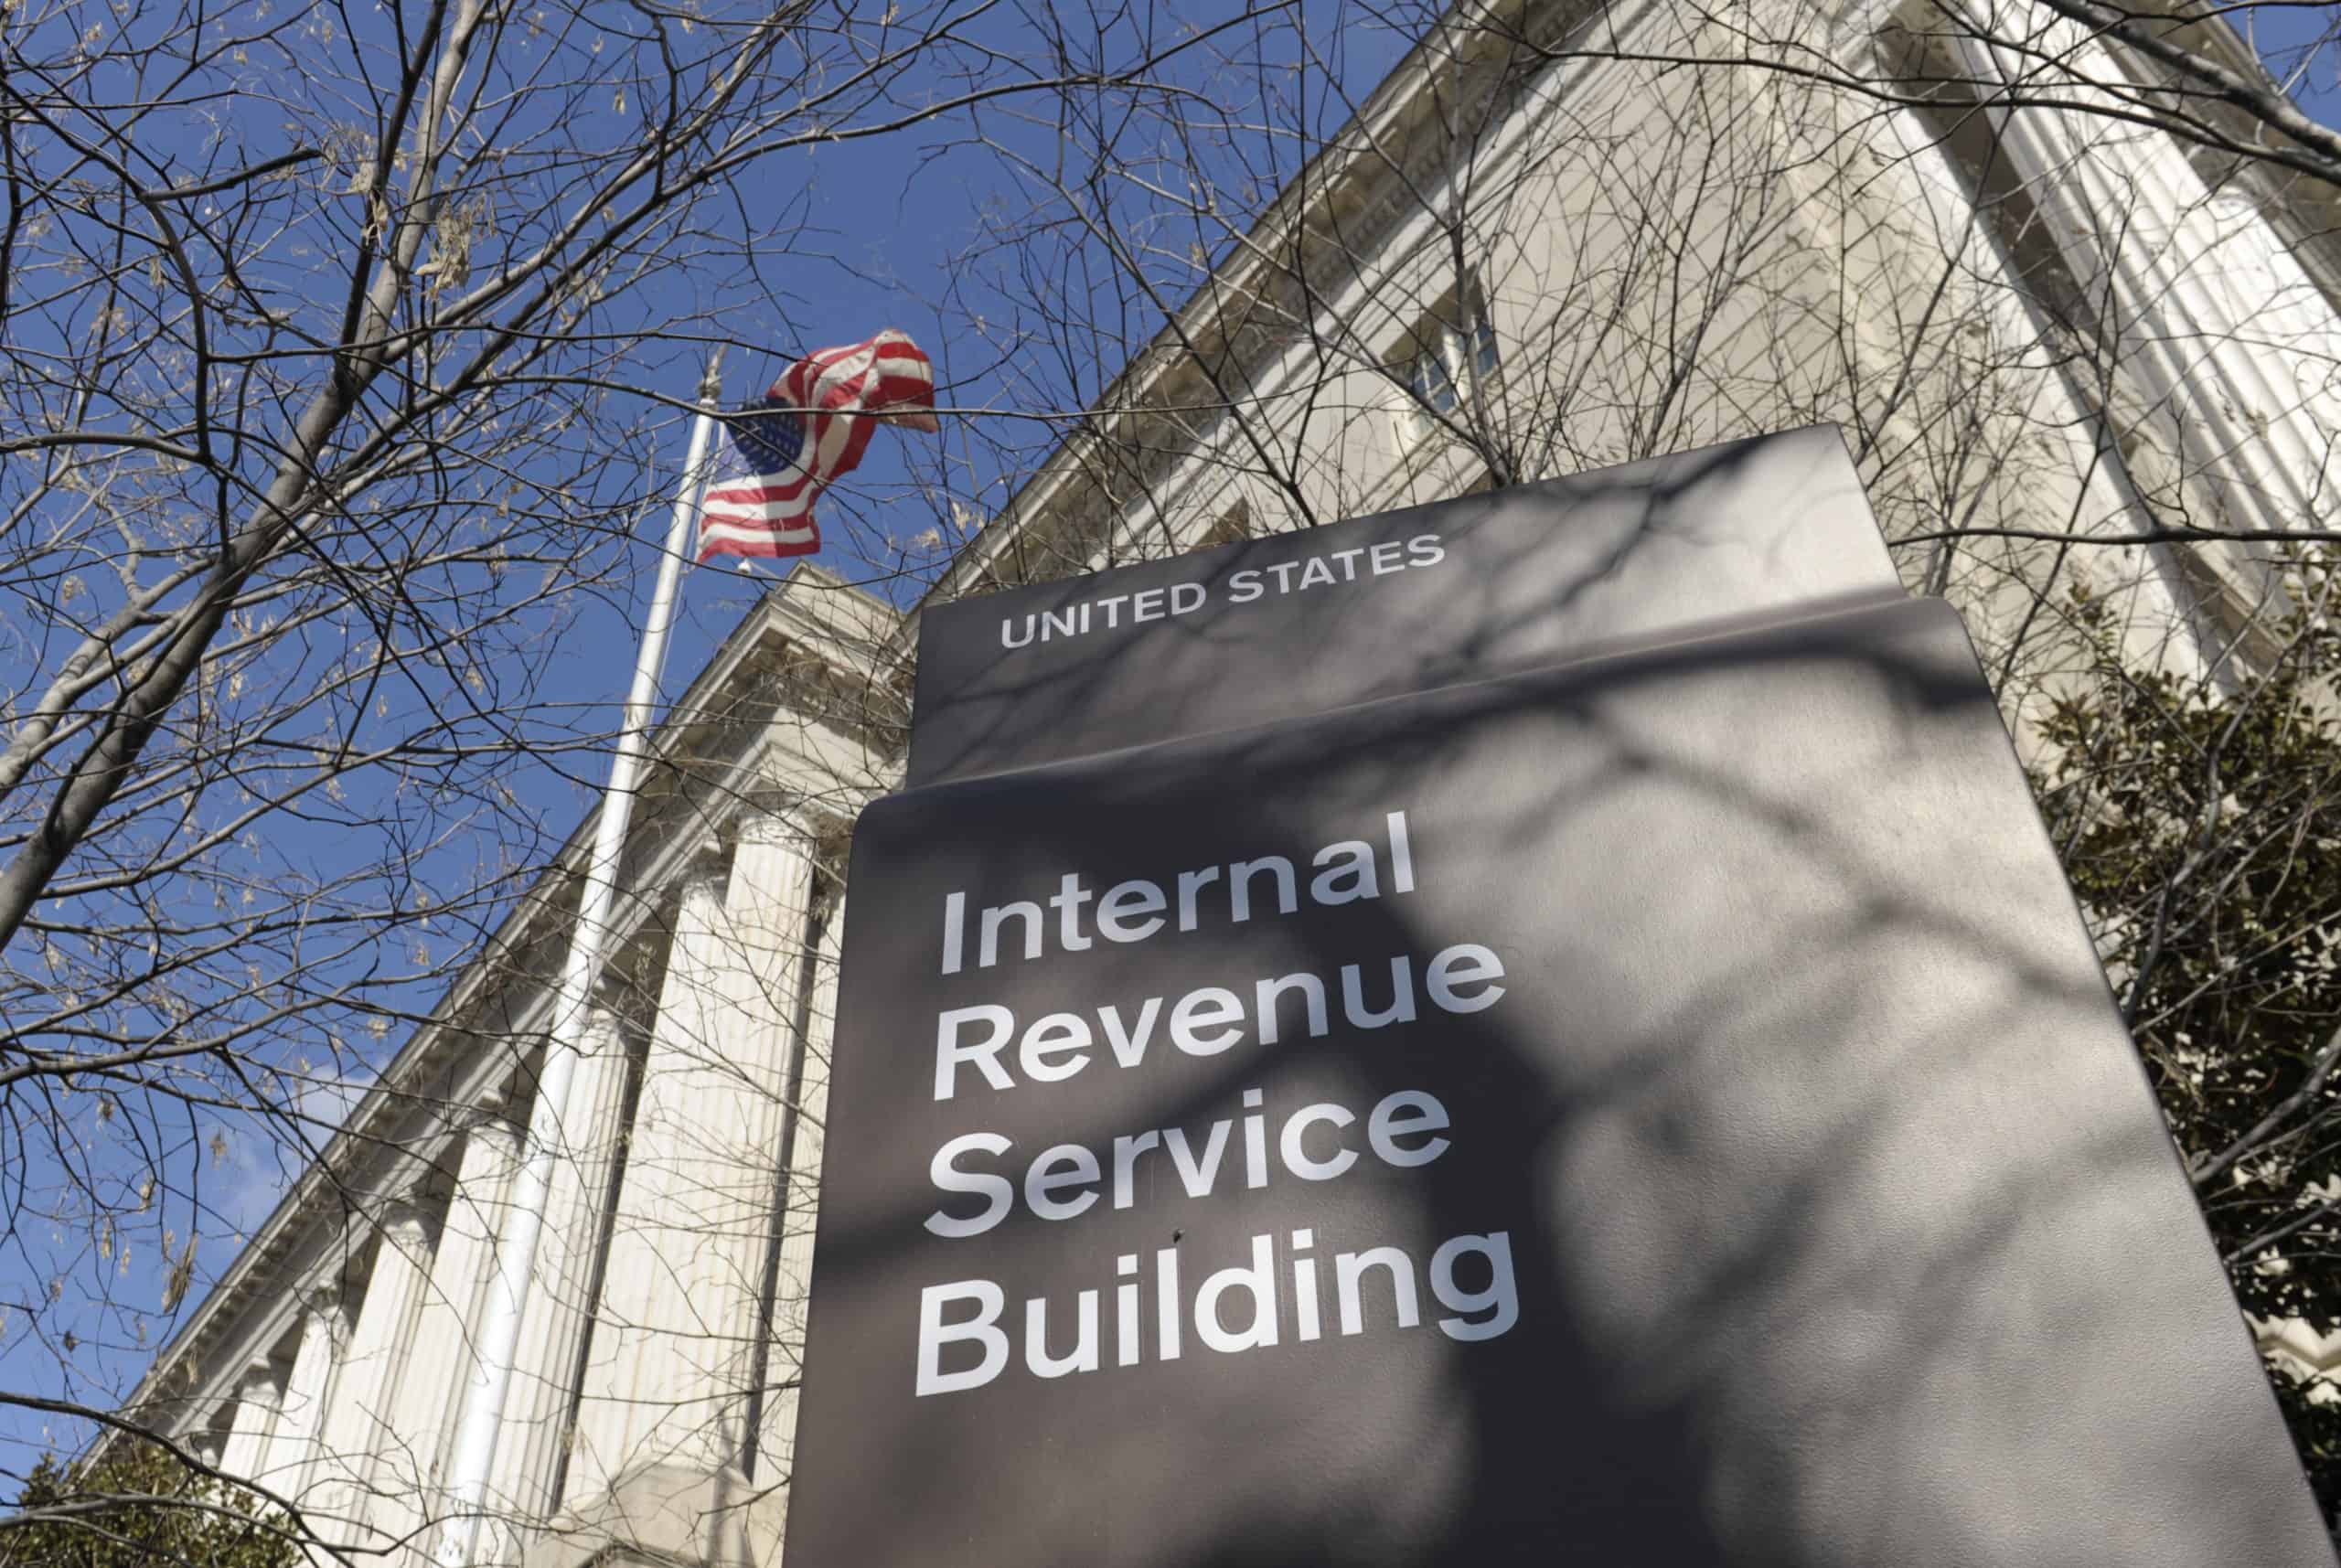 IRS-Fails-to-inform-o-Tax-Benefits-for-9/11-Victims